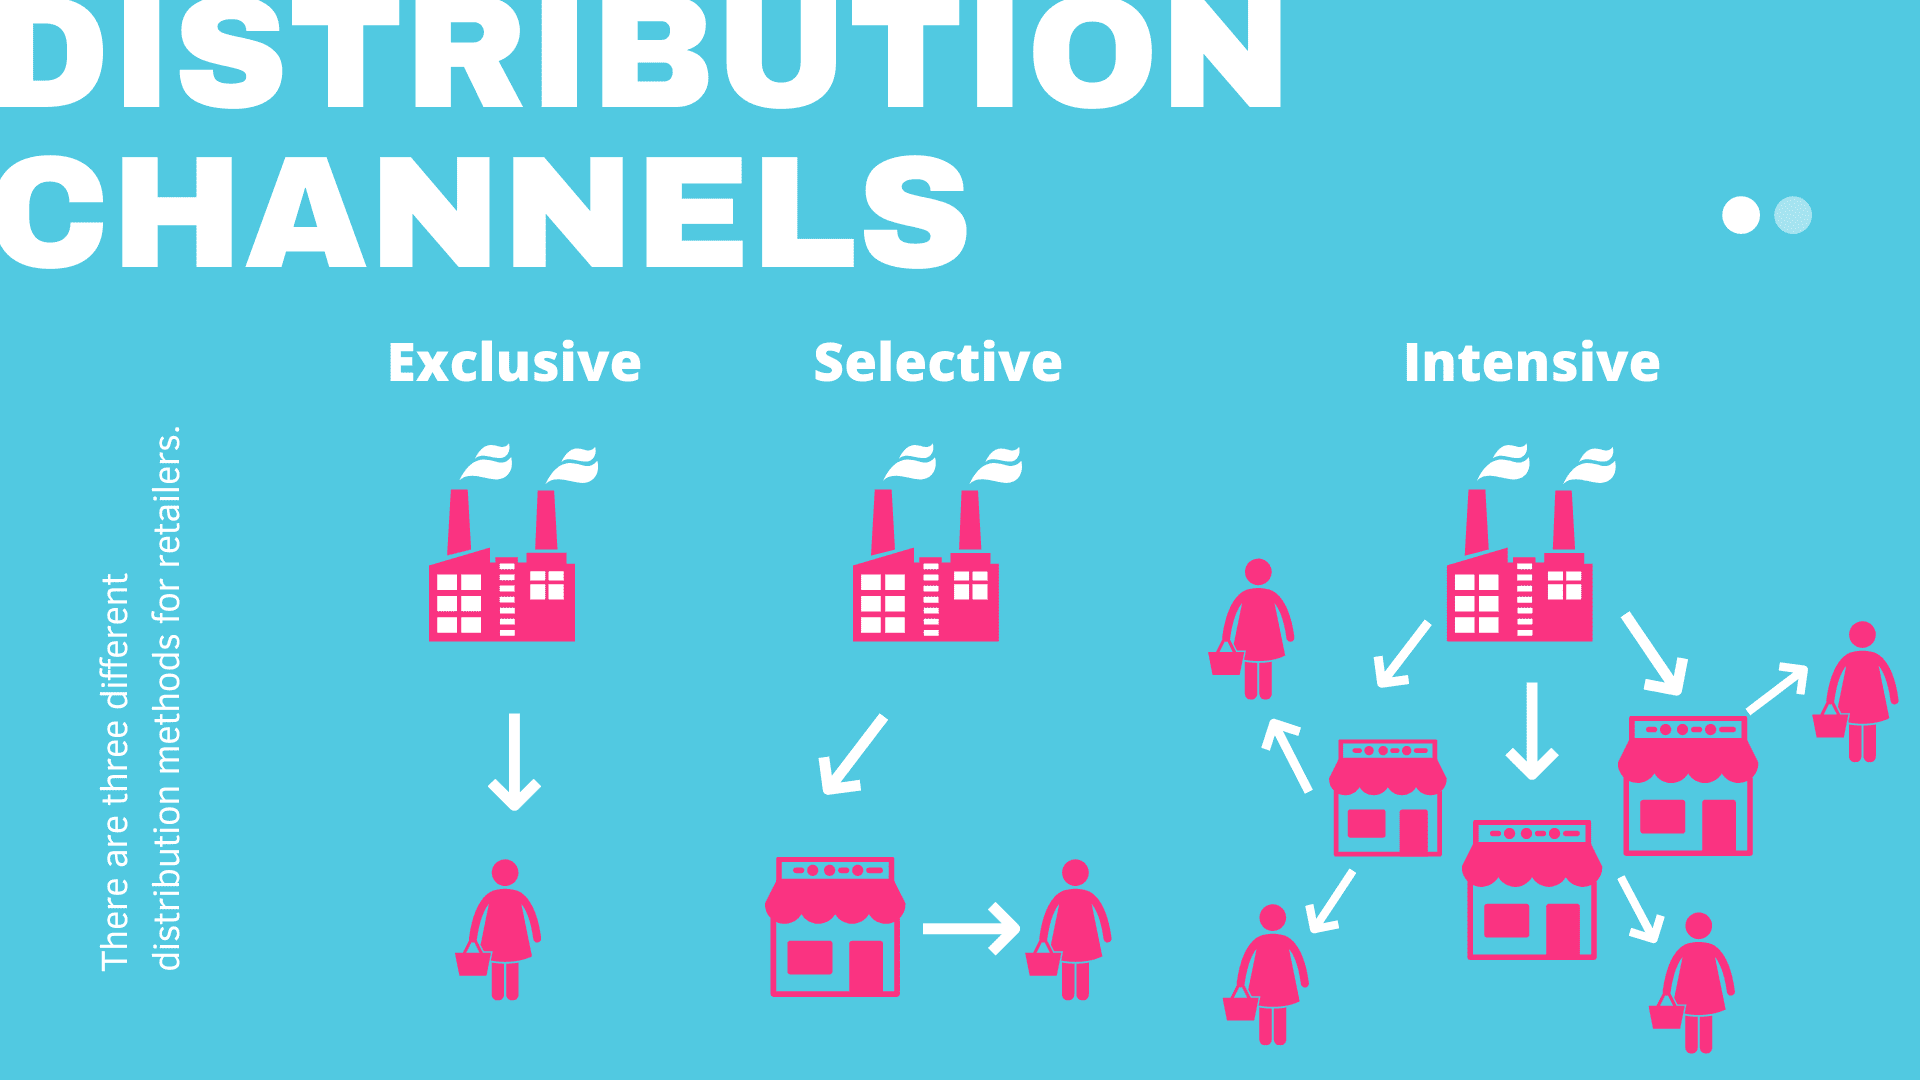 Visual representation of internet distribution channels including websites, social media, email marketing, and online advertising